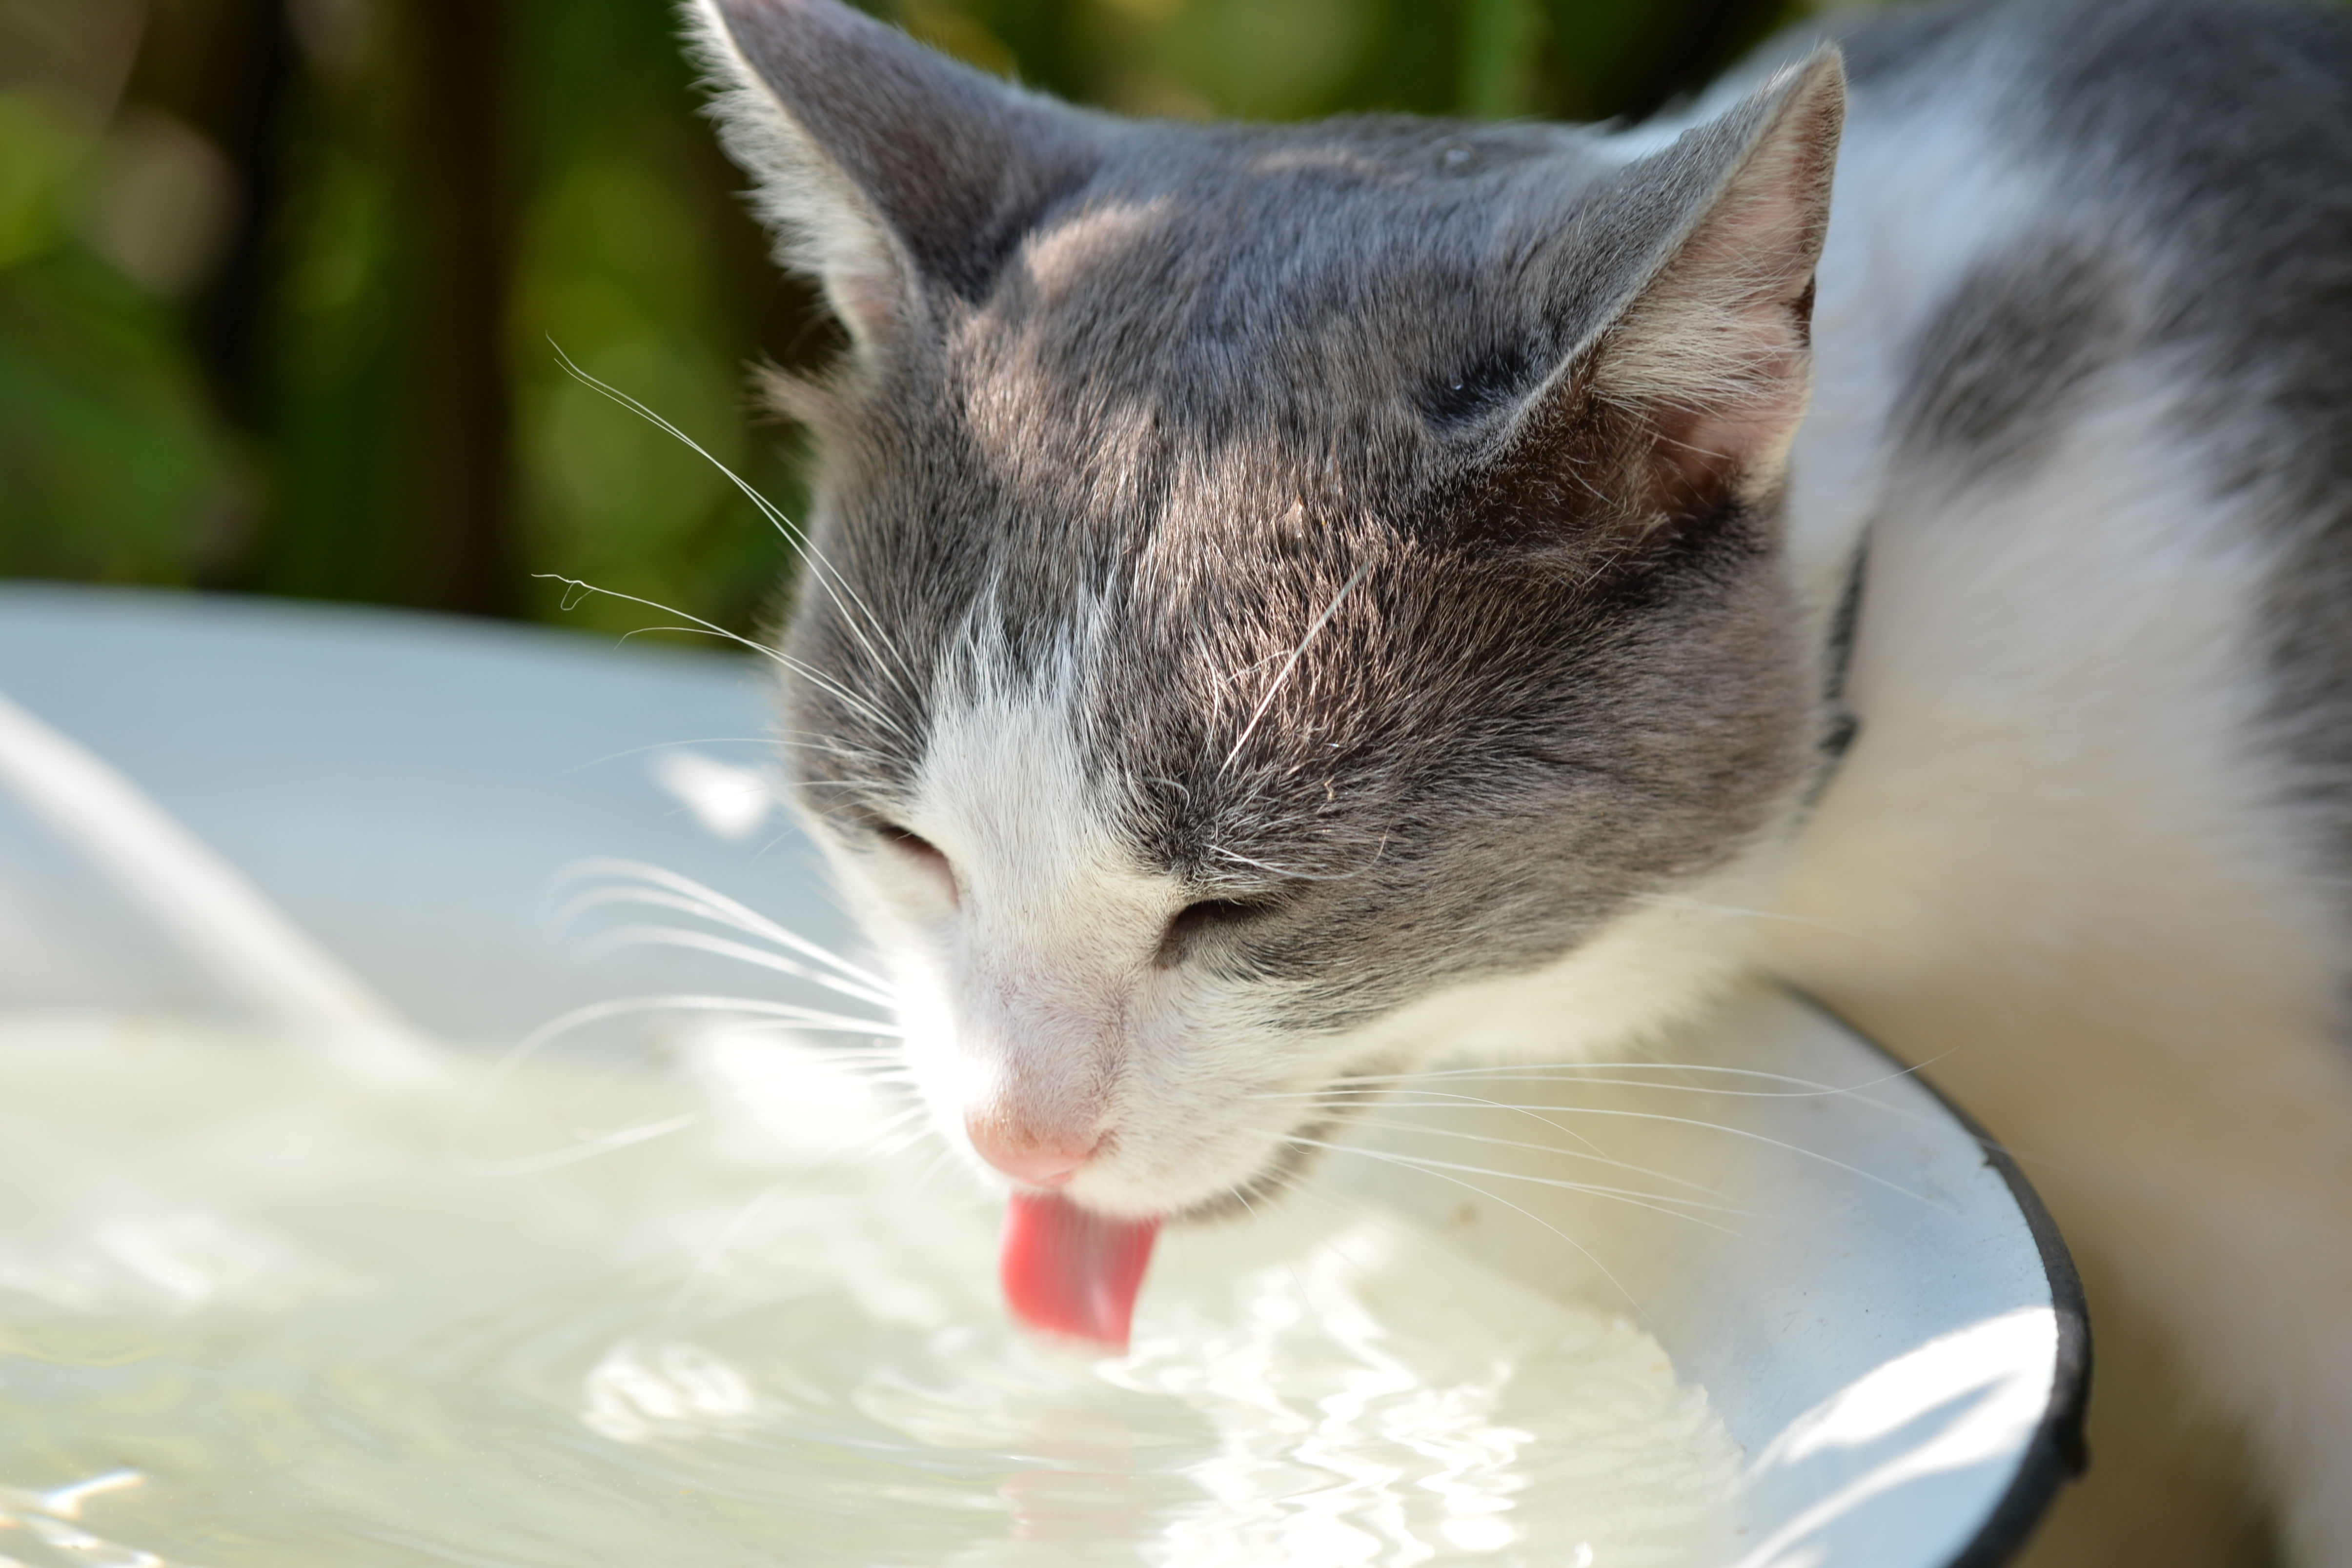 Cat drinks water out of a bowl